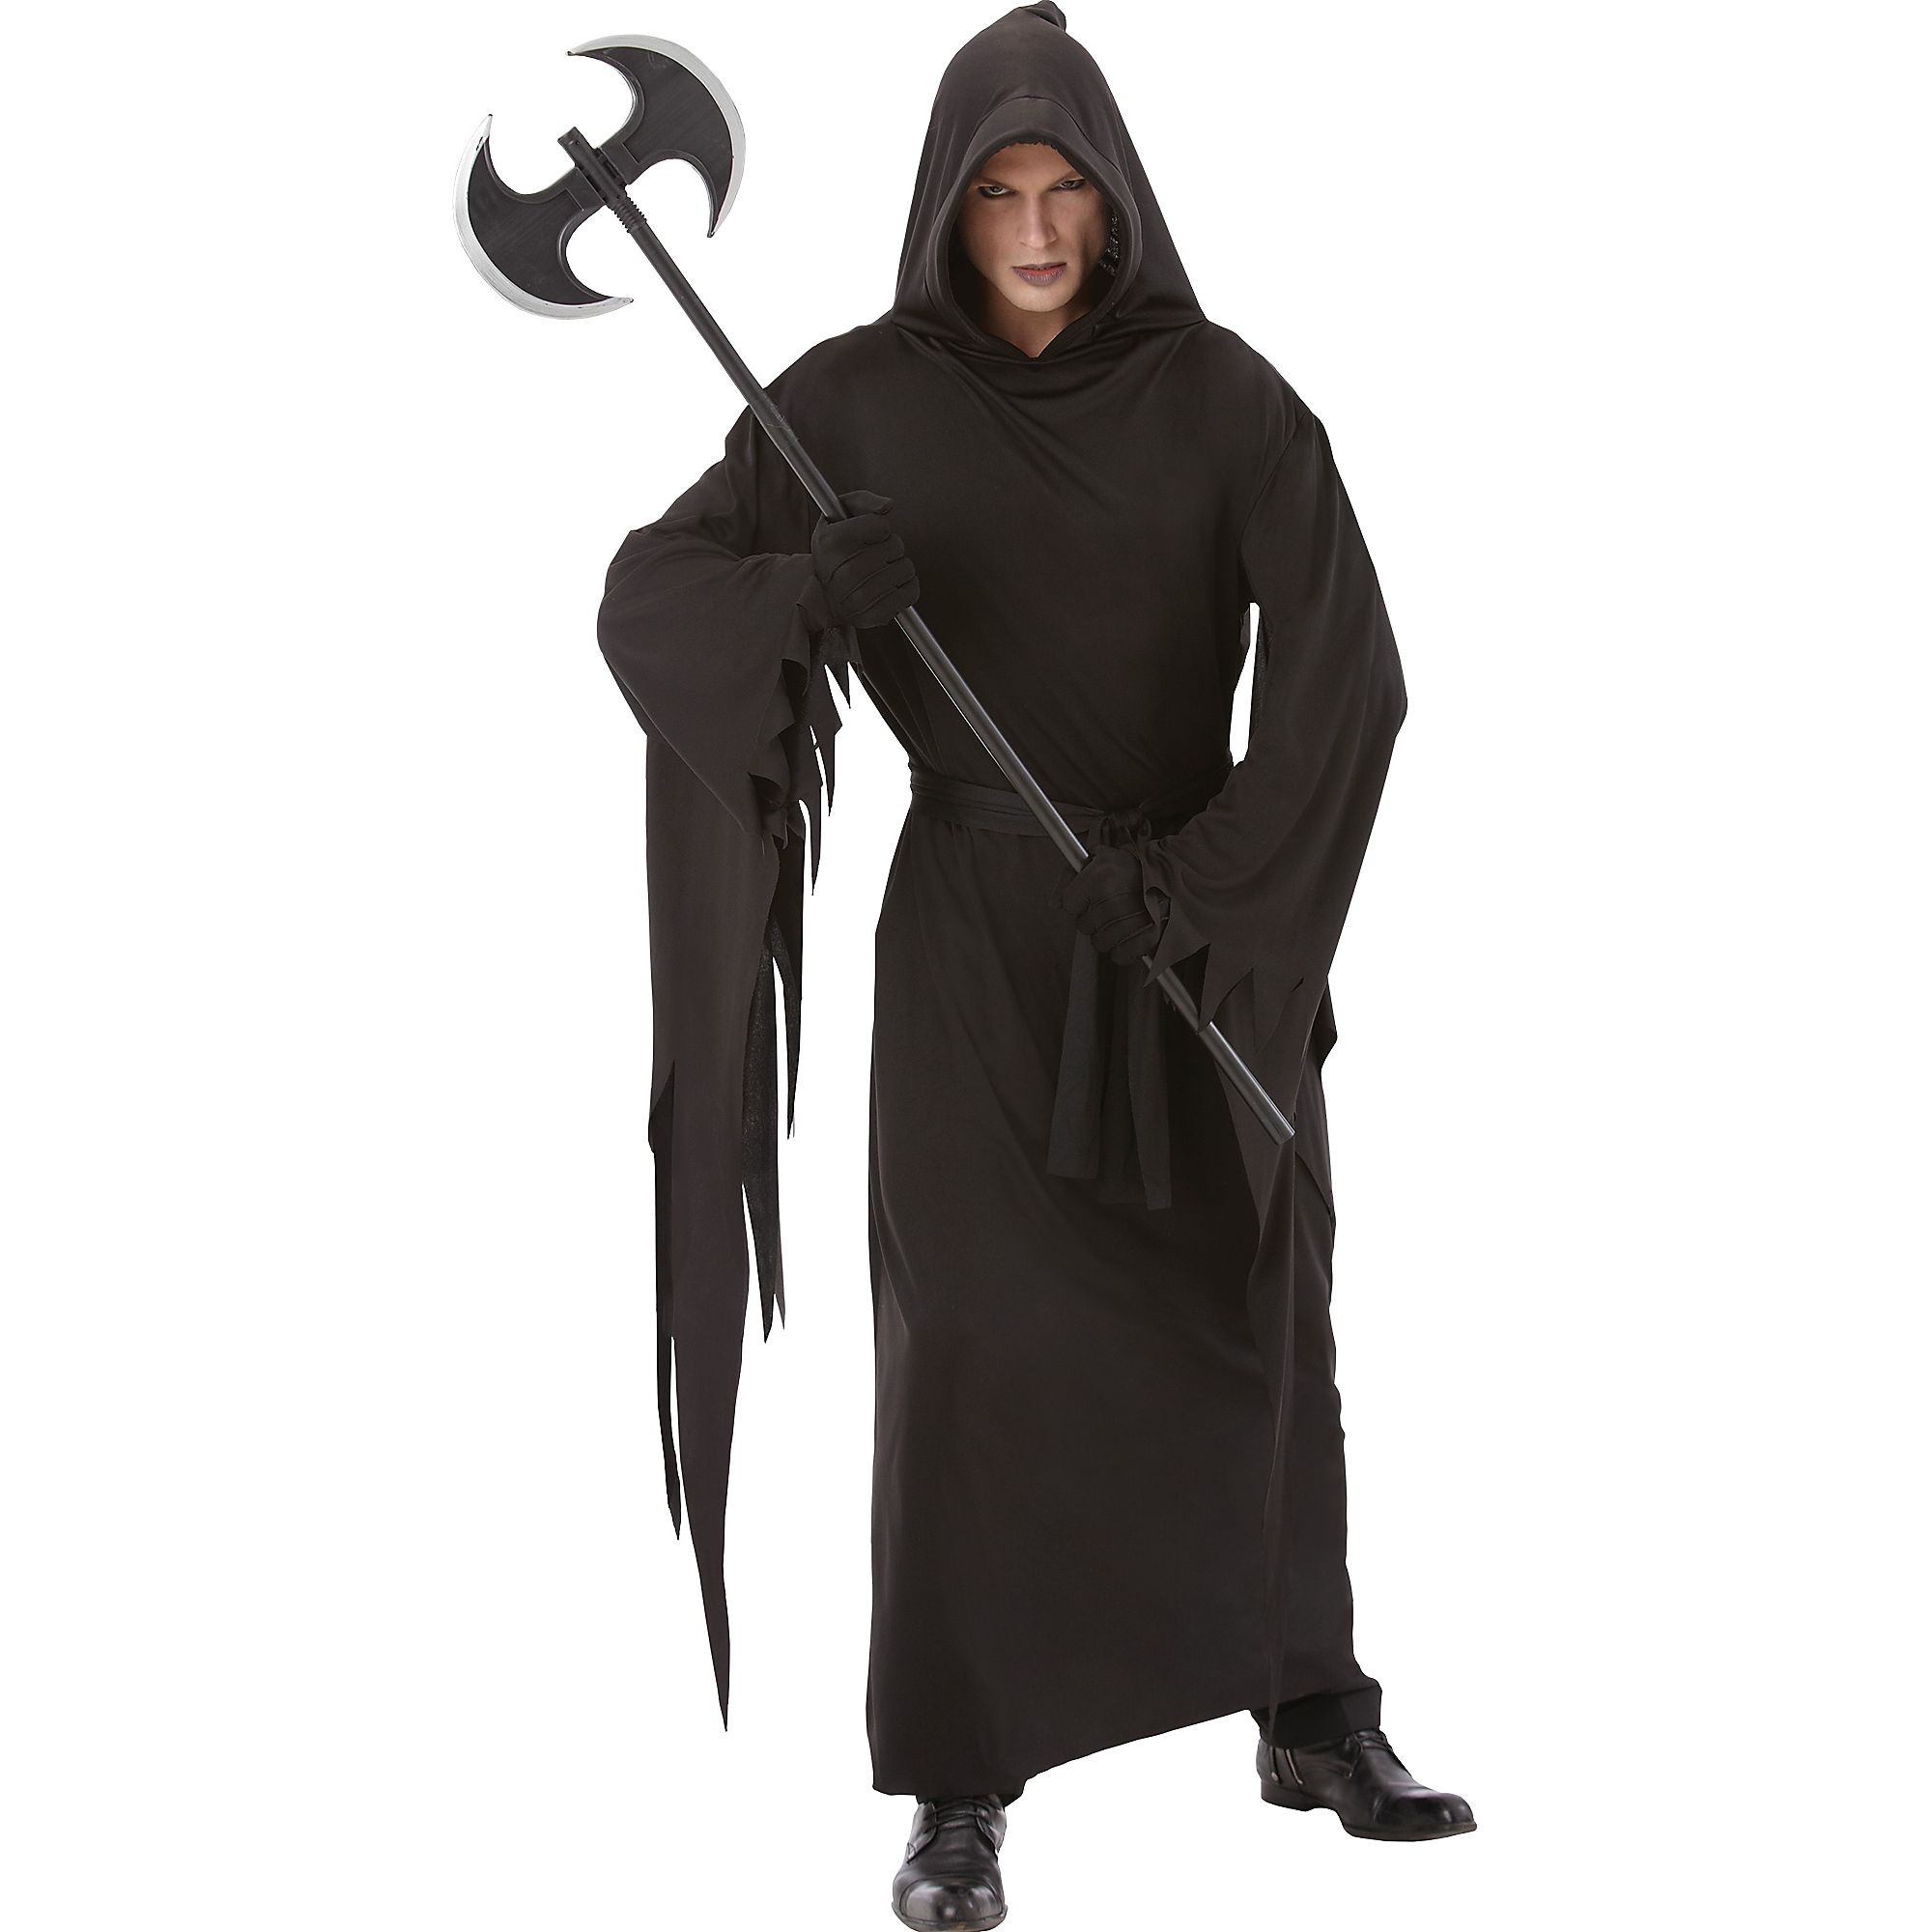 Scream Robe Halloween Costume for Adults, One Size, with Belt ...